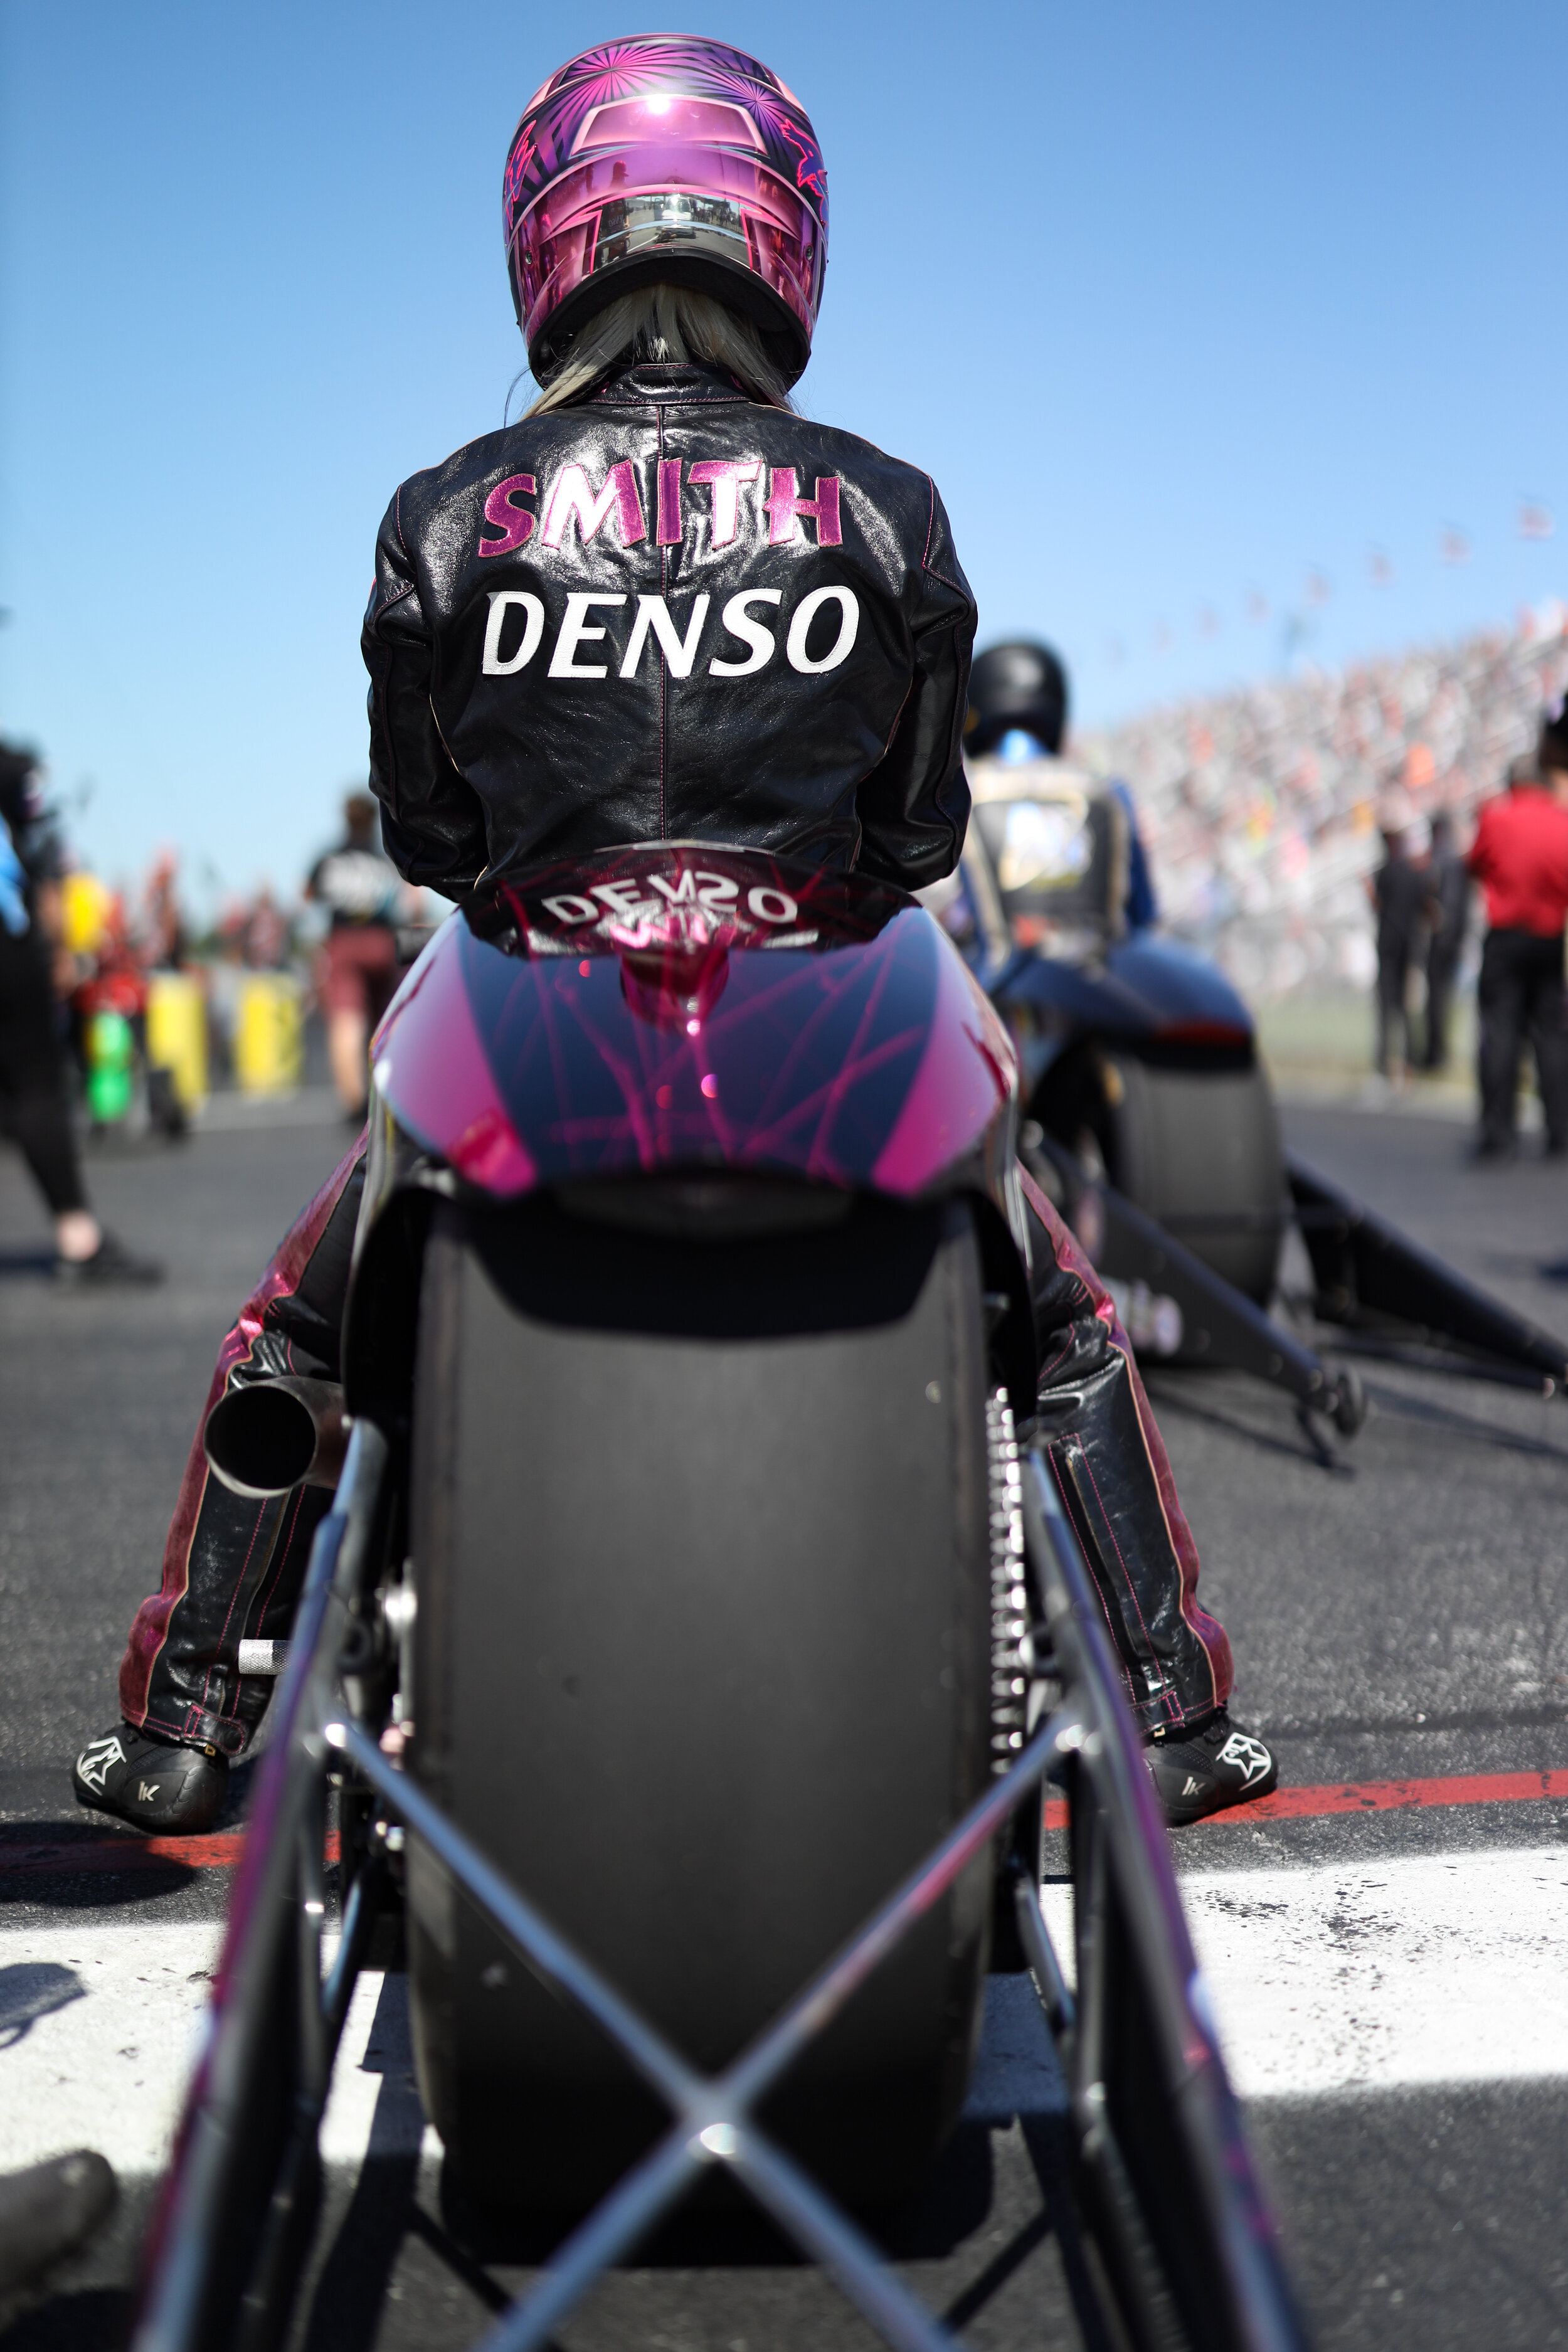 Pro Stock motorcycle racer Angie Smith waits patiently before her run.